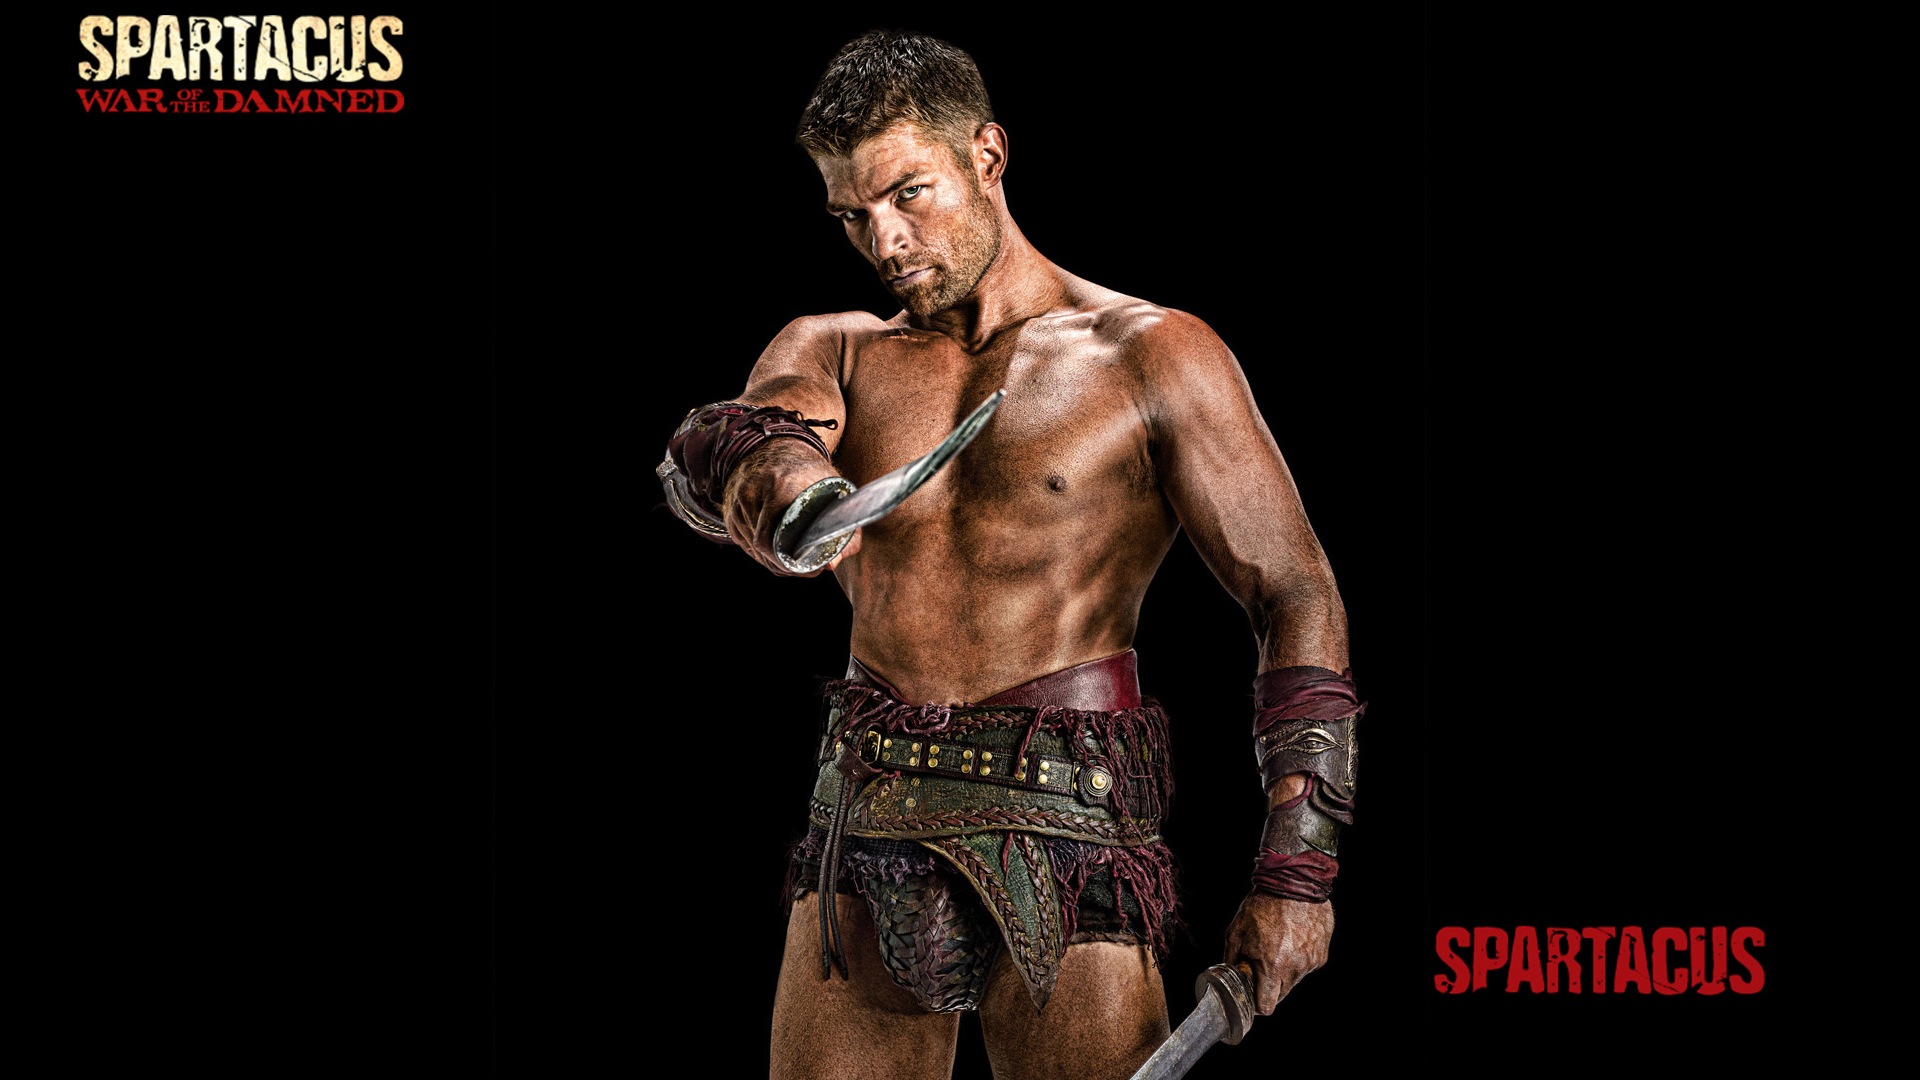 Spartacus: War of the Damned HD wallpapers #2 - 1920x1080